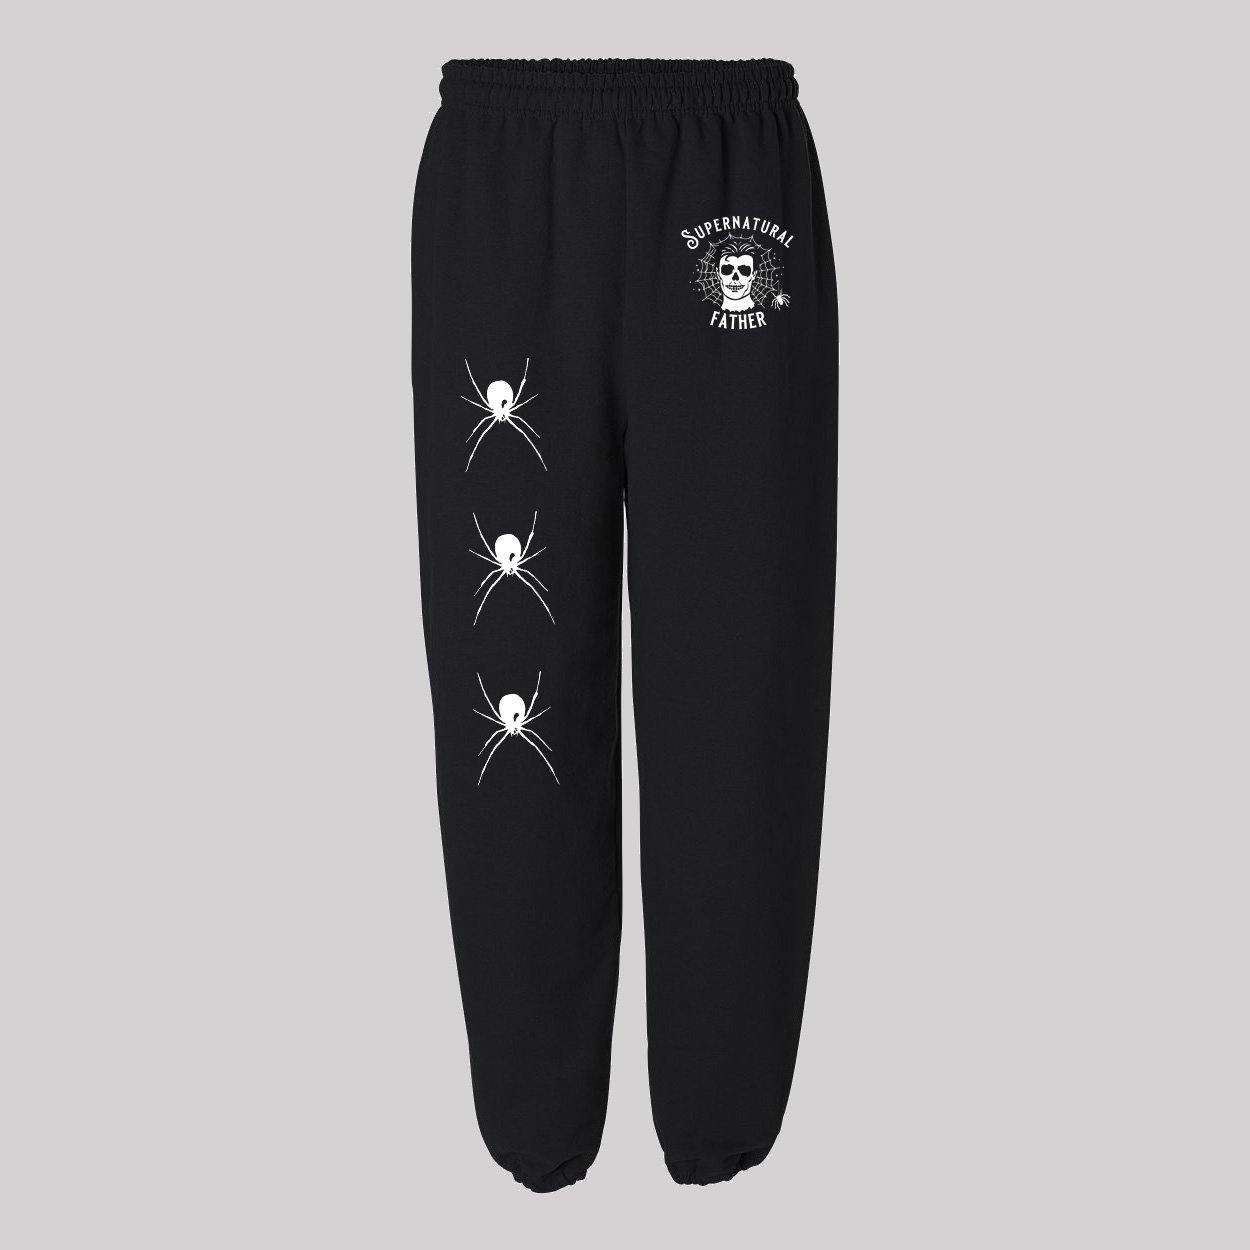 Supernatural Father Sweatpants - Baby Teith